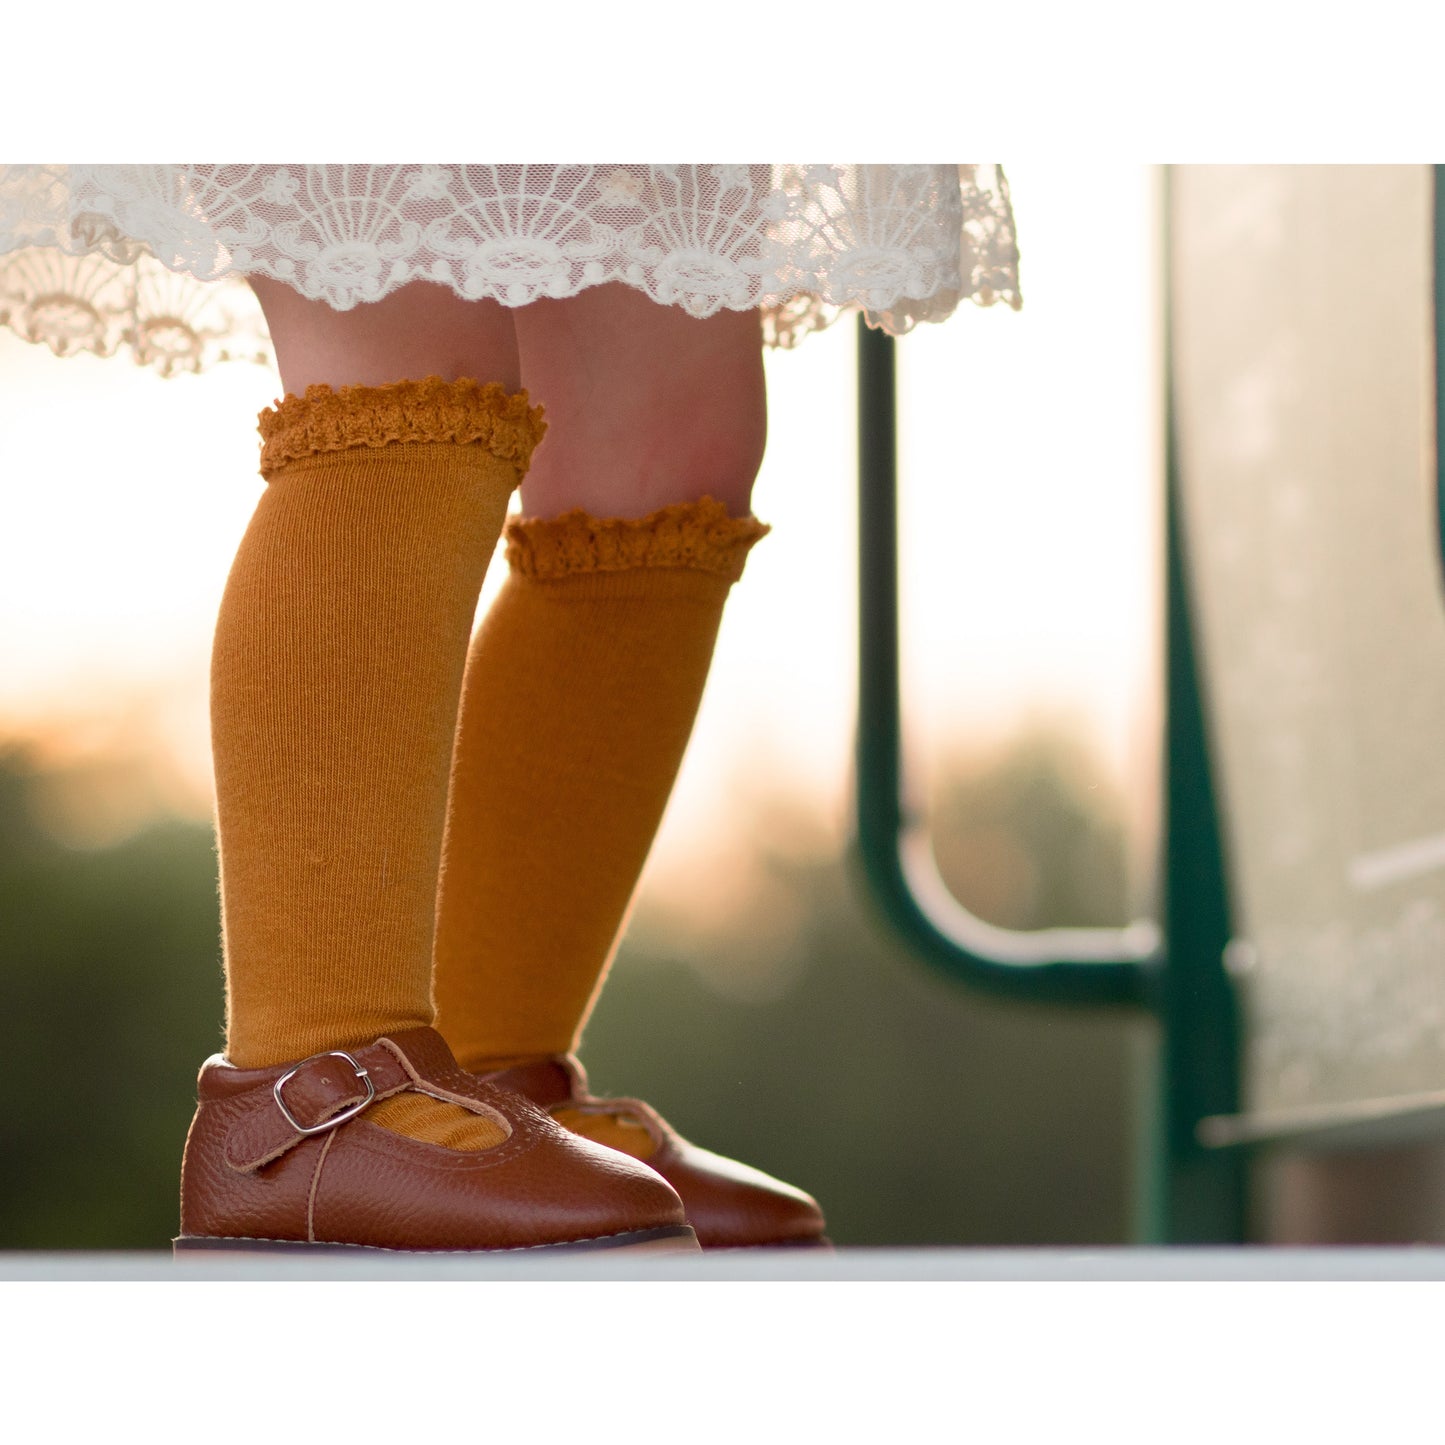 Lace Top Knee Highs in Mustard Lace  - Doodlebug's Children's Boutique